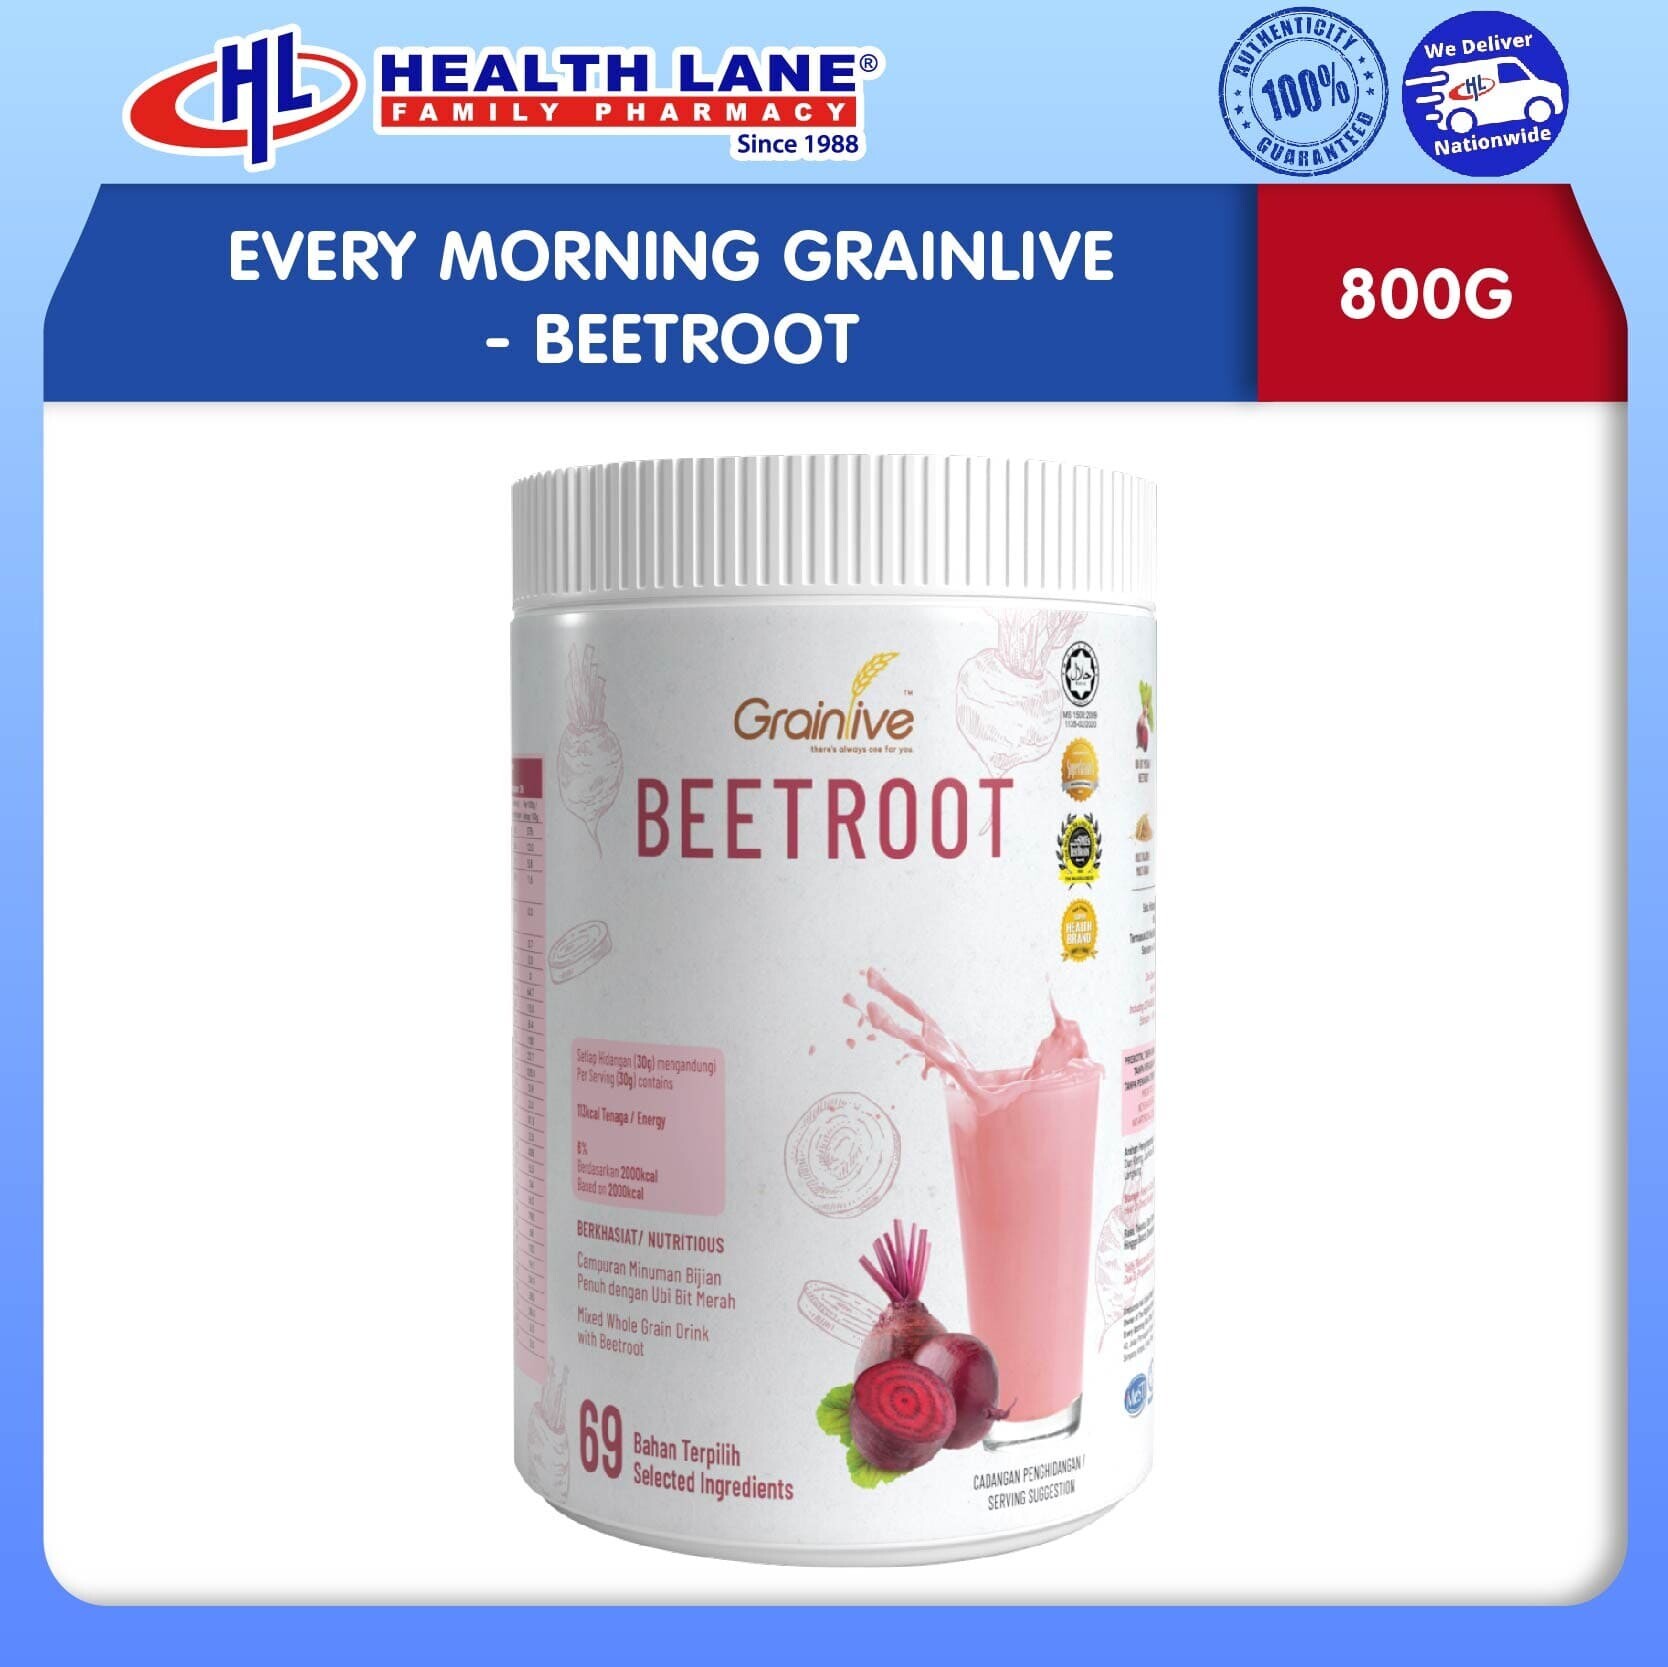 EVERY MORNING GRAINLIVE - BEETROOT (800G)